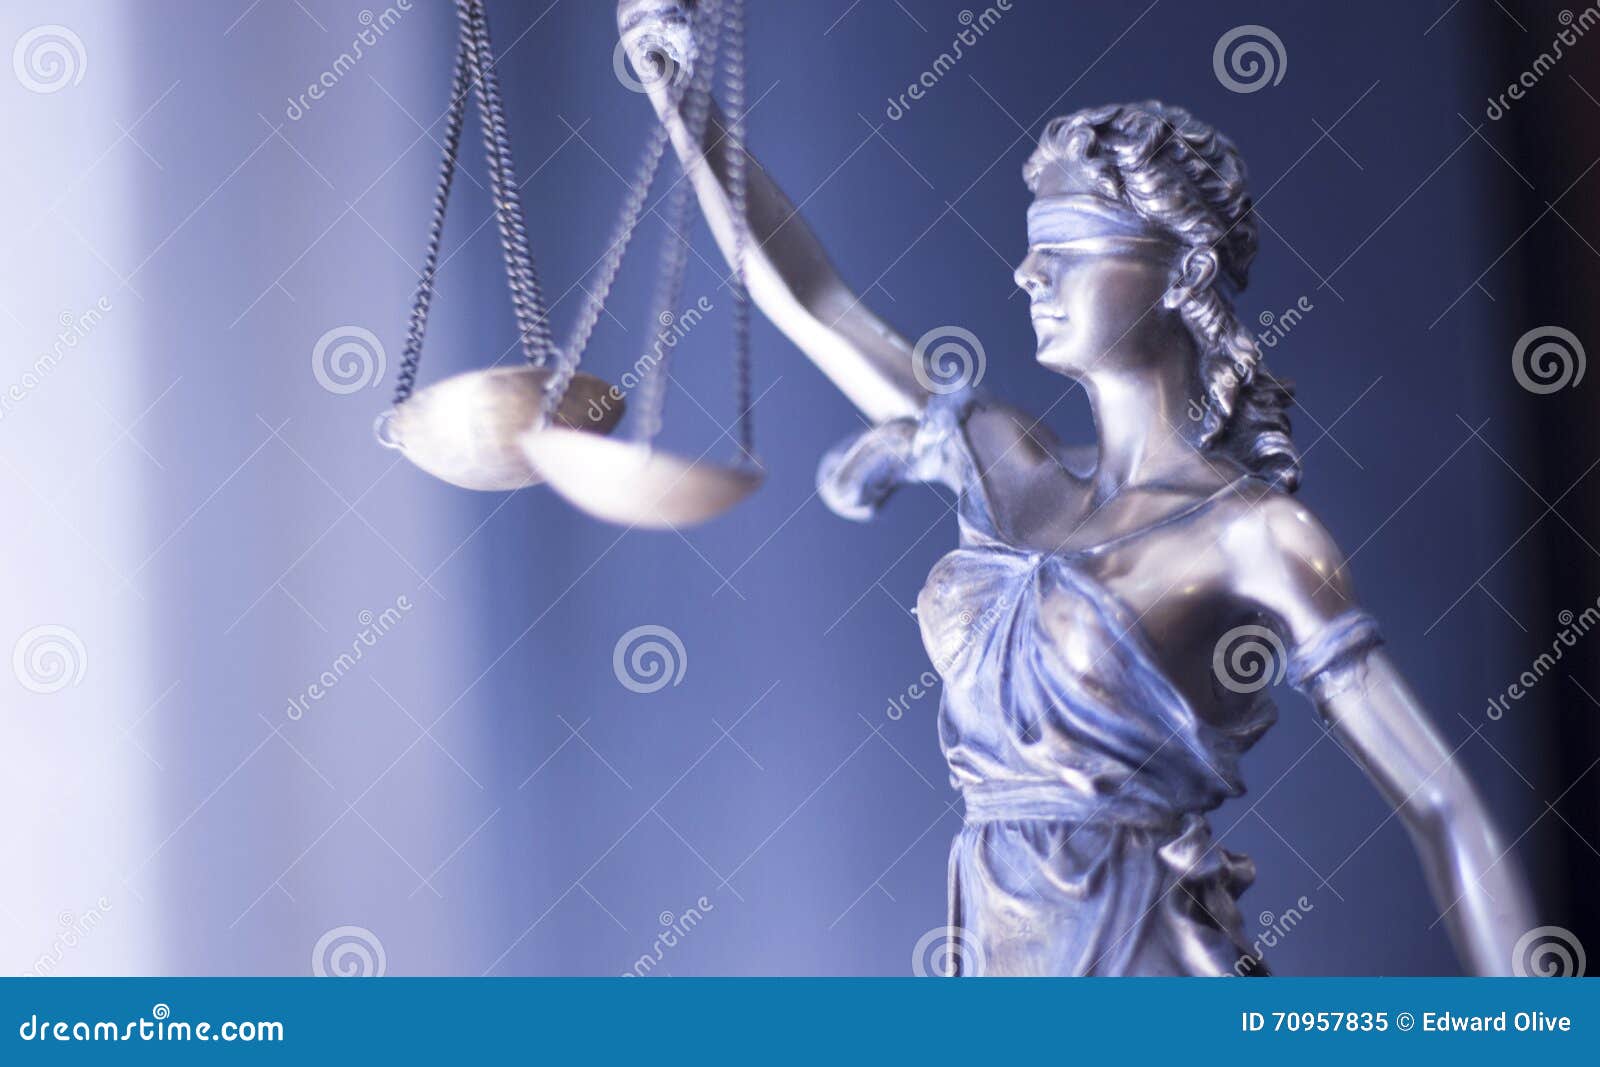 legal justice statue in law firm office